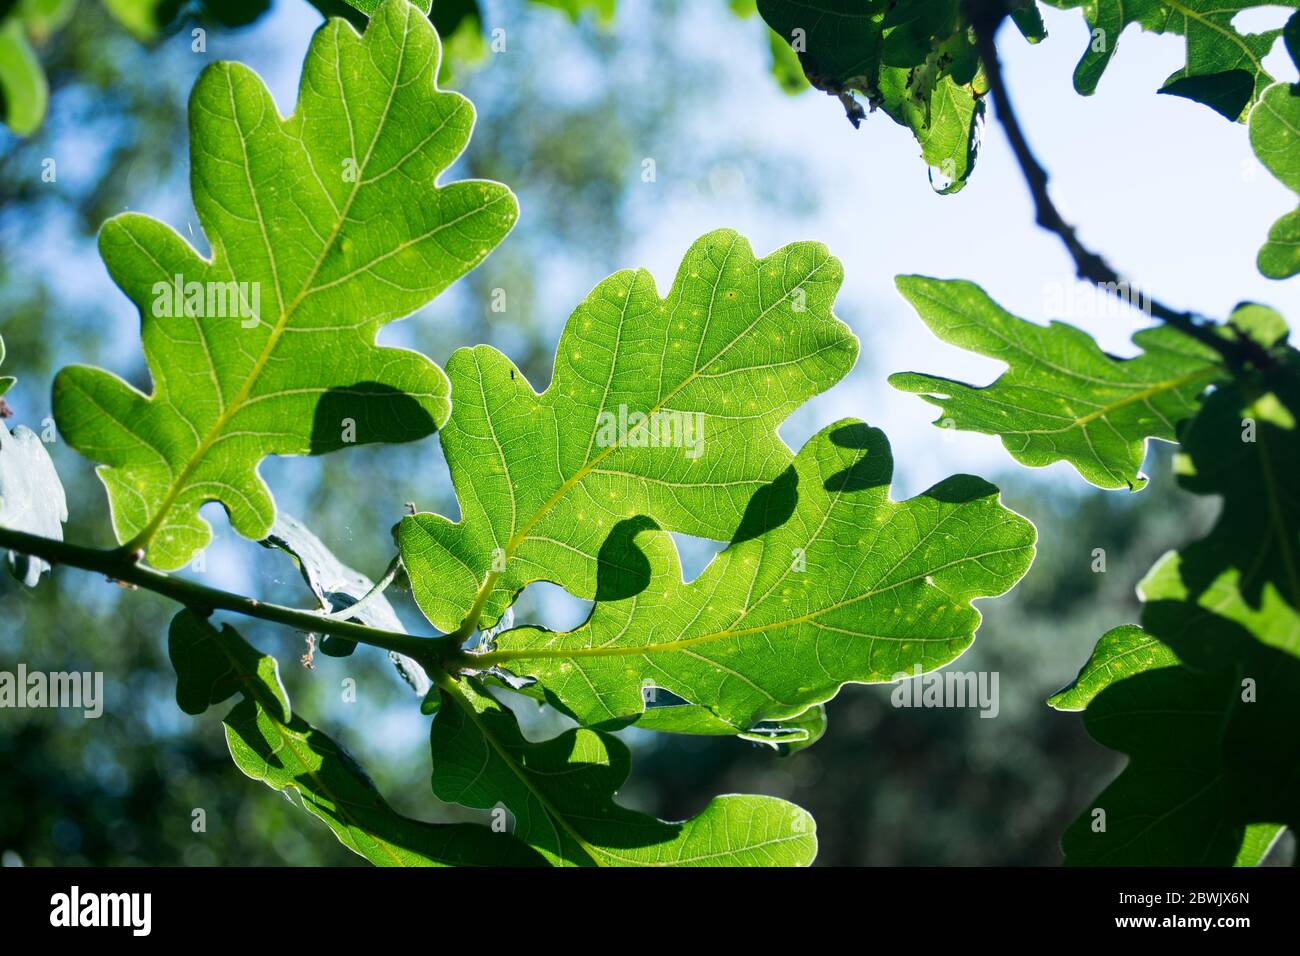 The chlorophyll green leaves of the English Oak Tree (Quercus robur) Stock Photo